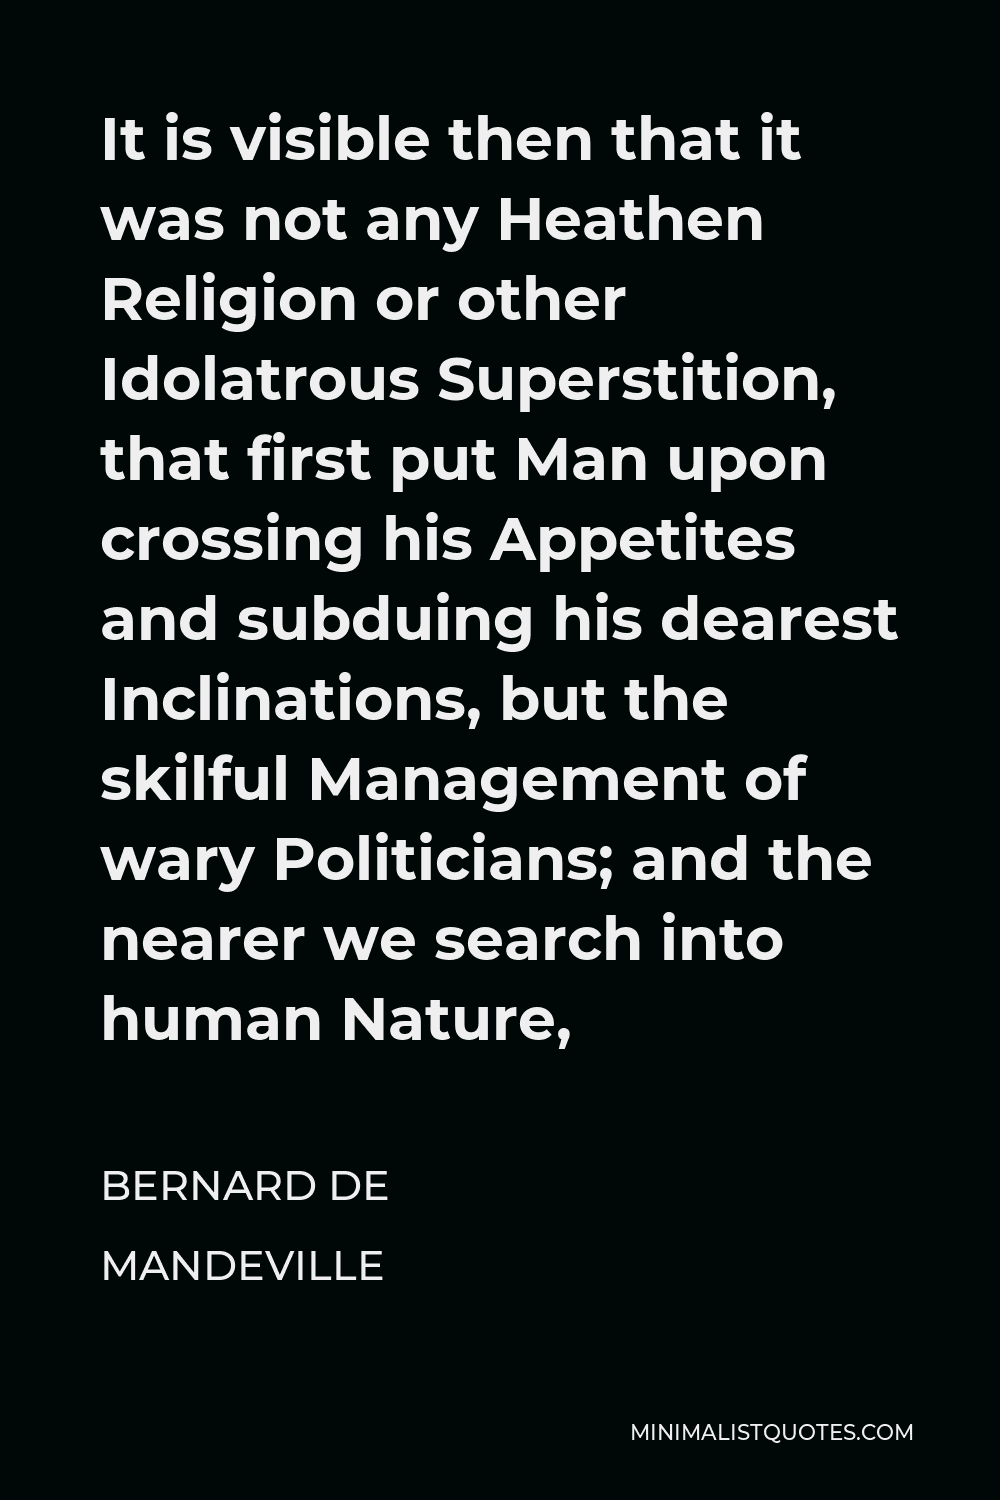 Bernard de Mandeville Quote - It is visible then that it was not any Heathen Religion or other Idolatrous Superstition, that first put Man upon crossing his Appetites and subduing his dearest Inclinations, but the skilful Management of wary Politicians; and the nearer we search into human Nature,